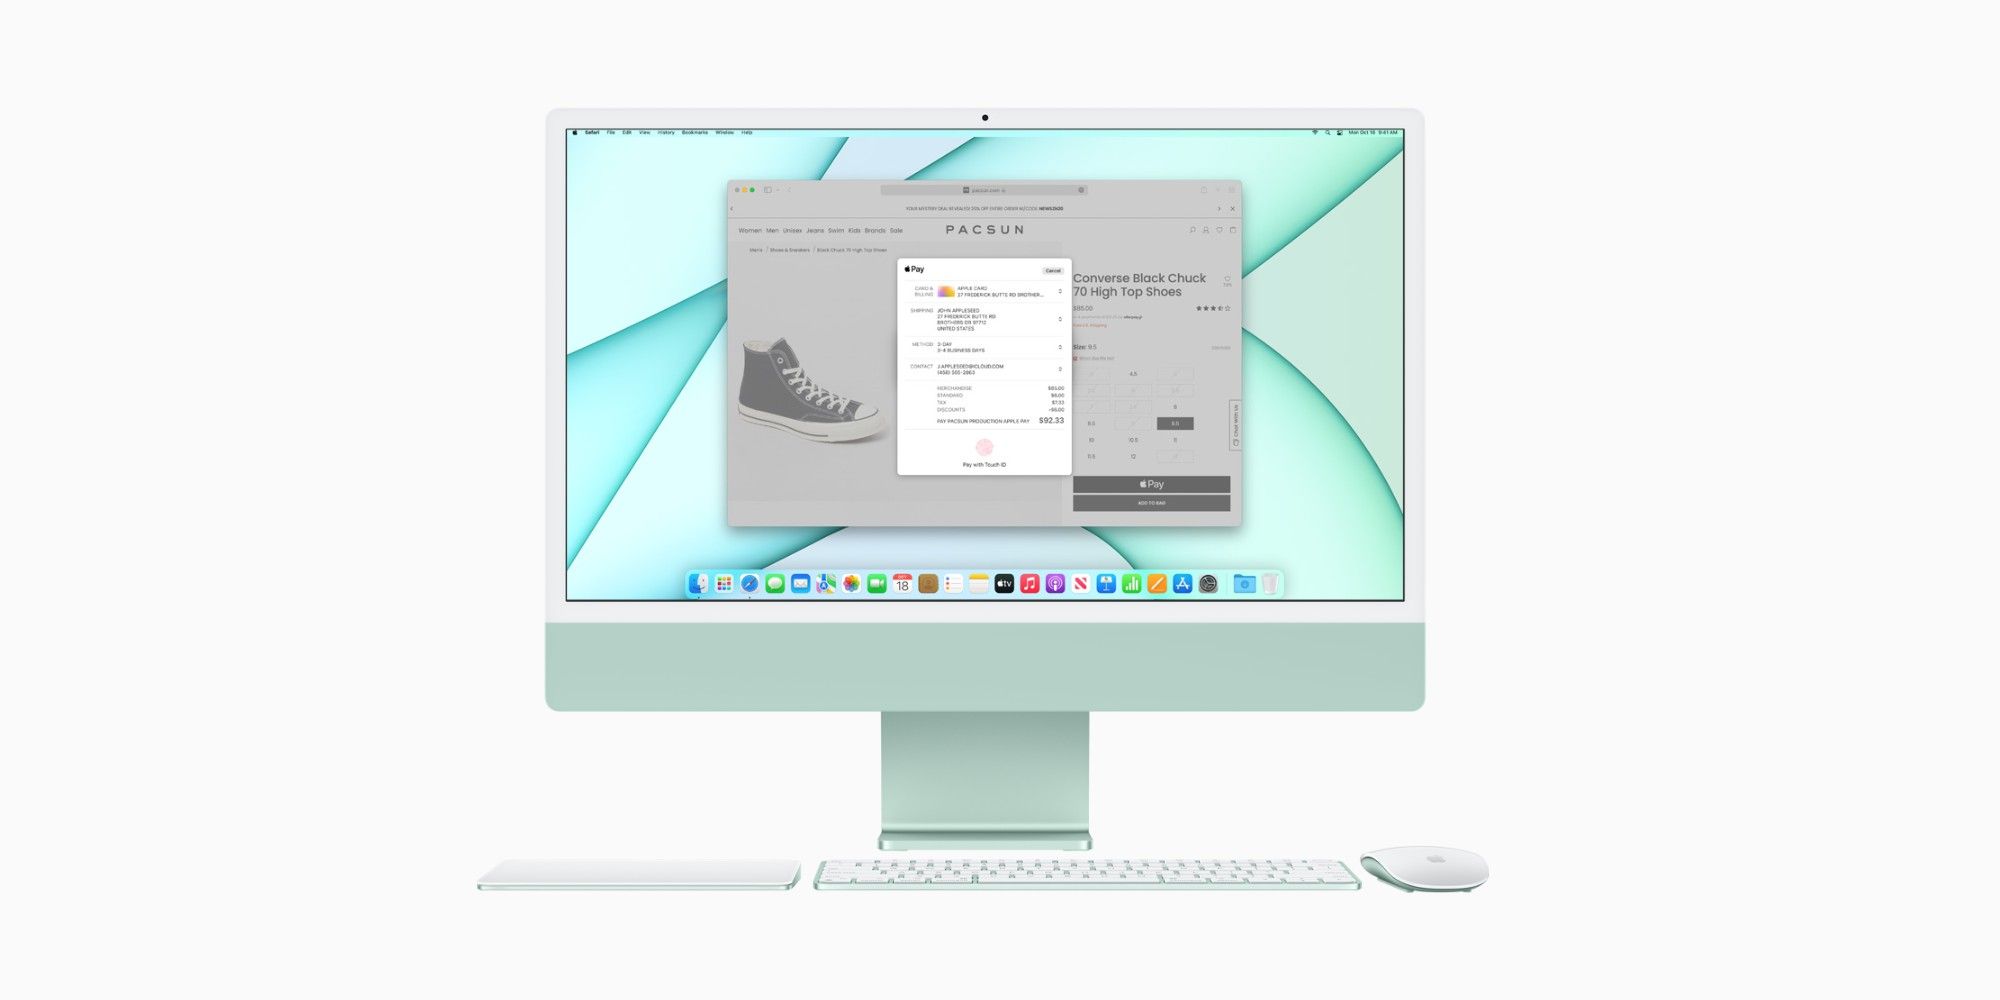 A New iMac Might Not Be Launched Till The M3 Chip Is Prepared